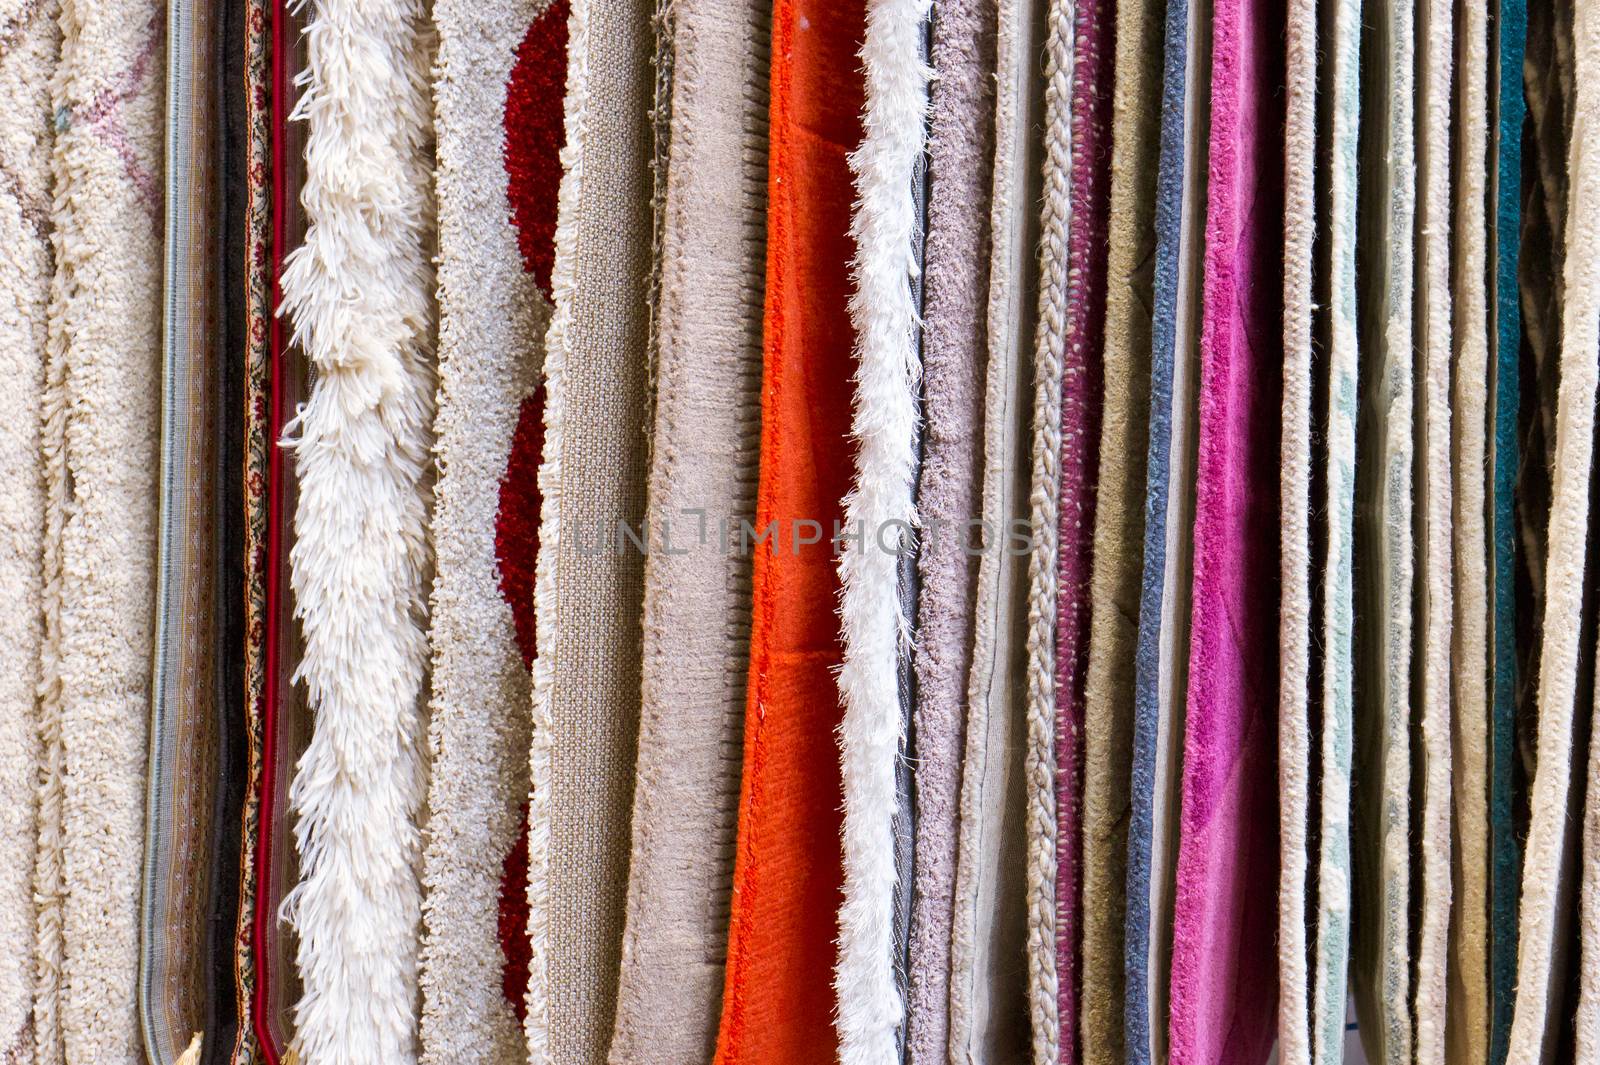 Edges of hanging rugs as a background